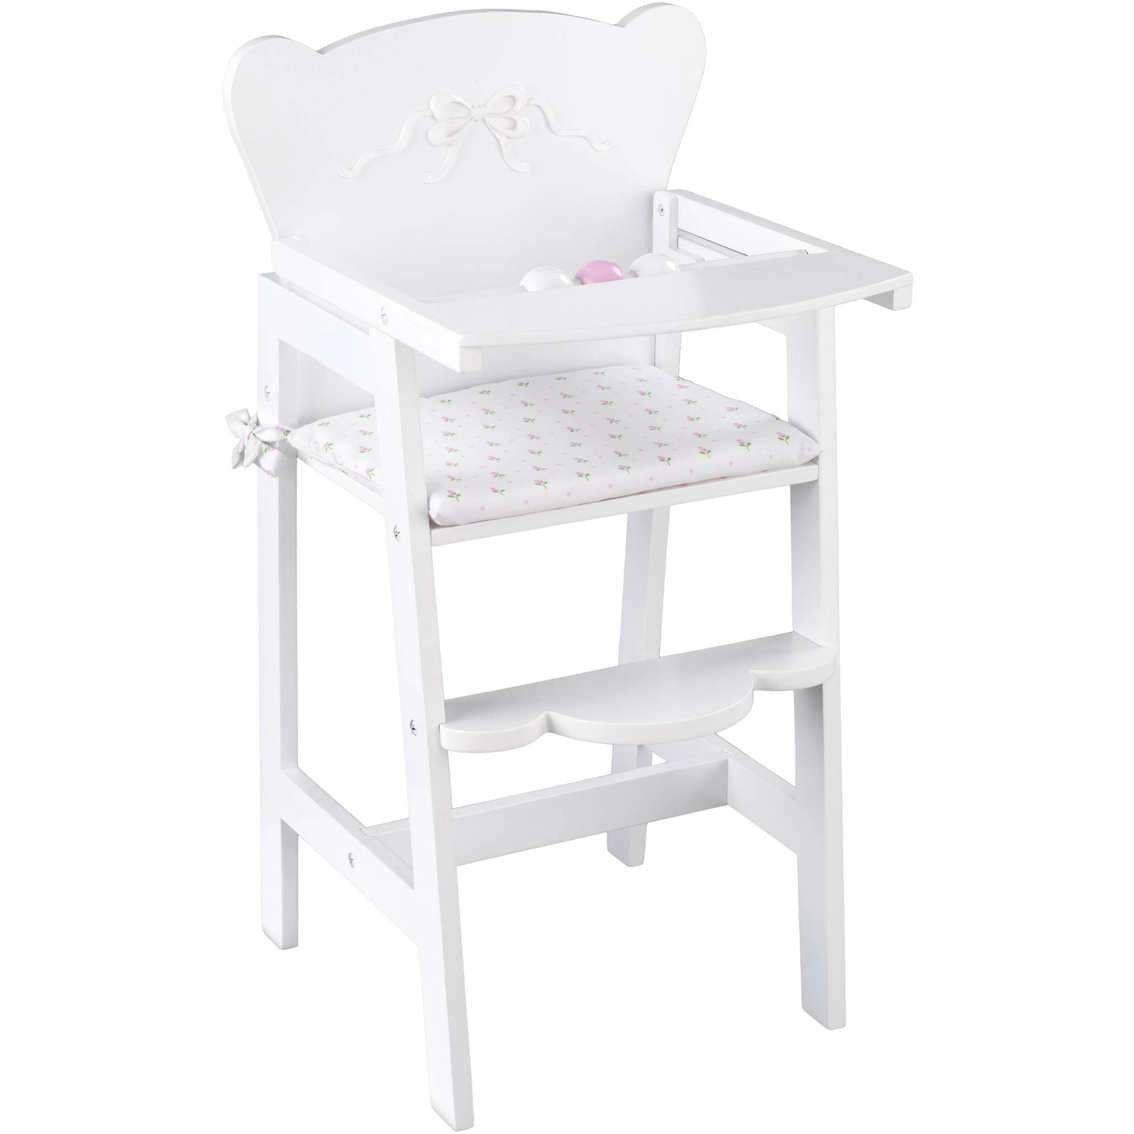 Kidkraft Lil Doll High Chair Doll Accessories Baby Toys